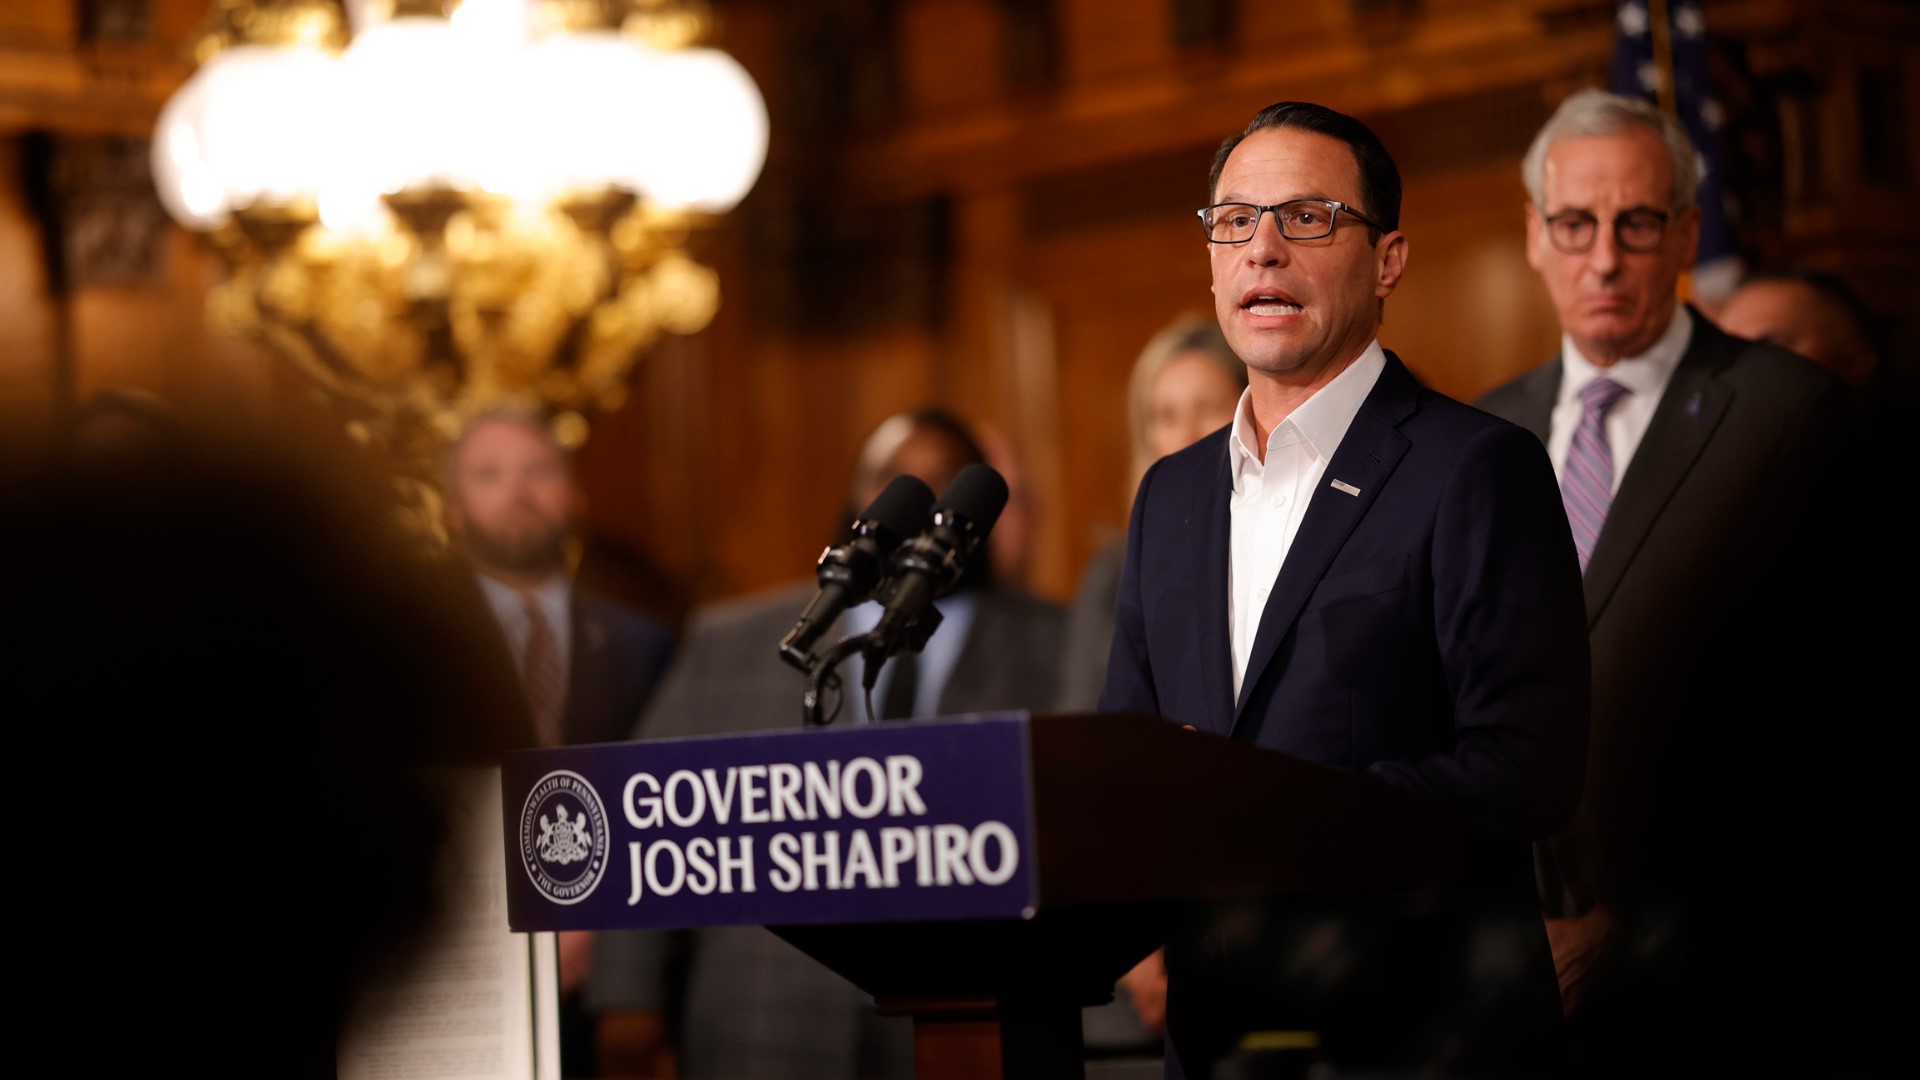 Shapiro issued a proclamation in support of the Pennsylvania Jewish community and allies who stand against hate, terror and violence.